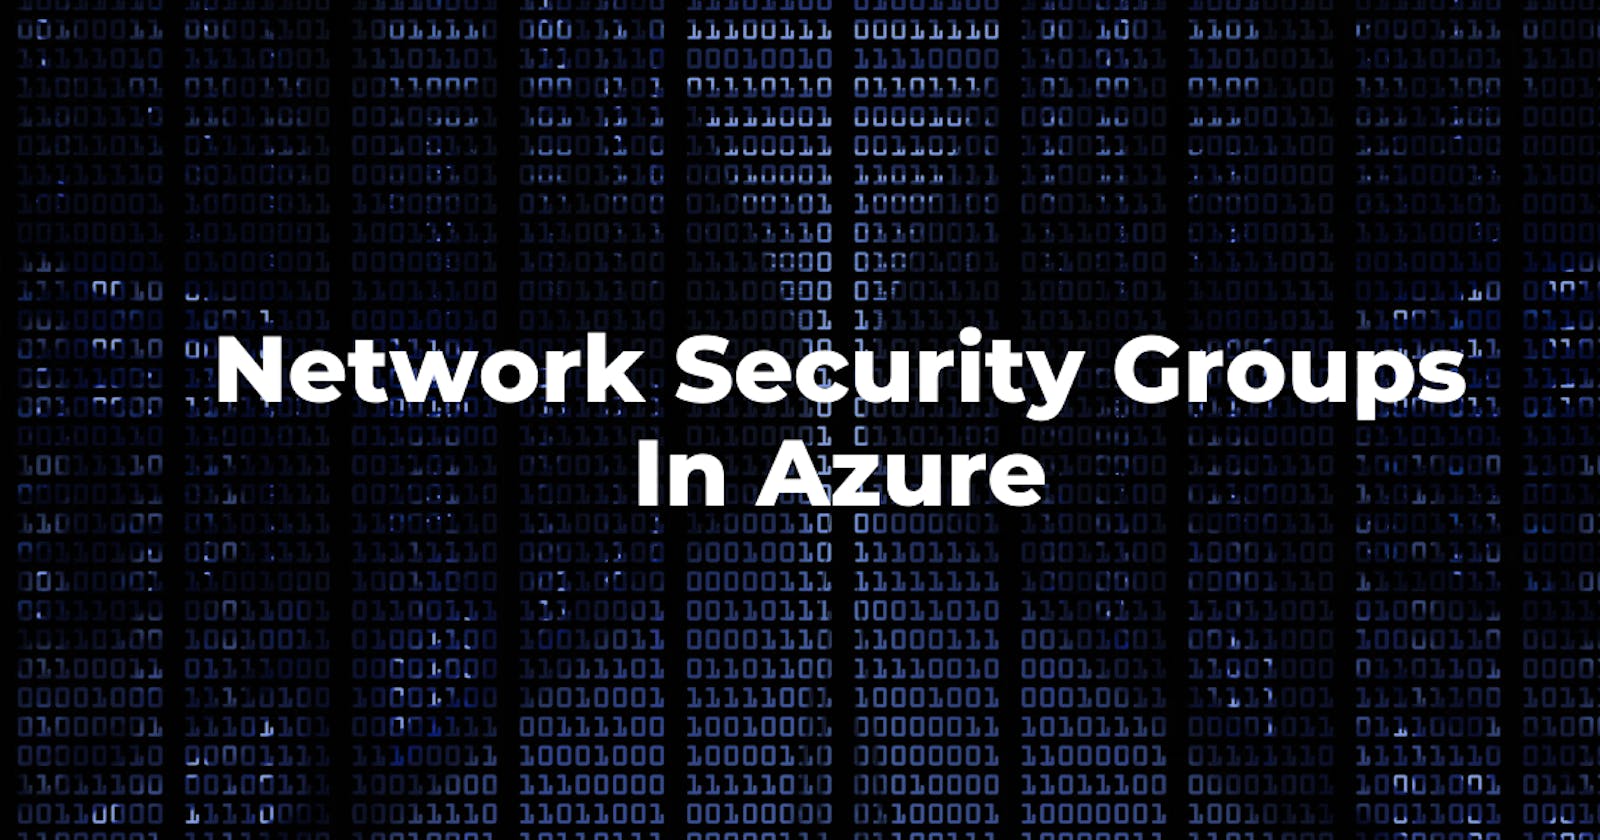 Azure Network Security Groups: